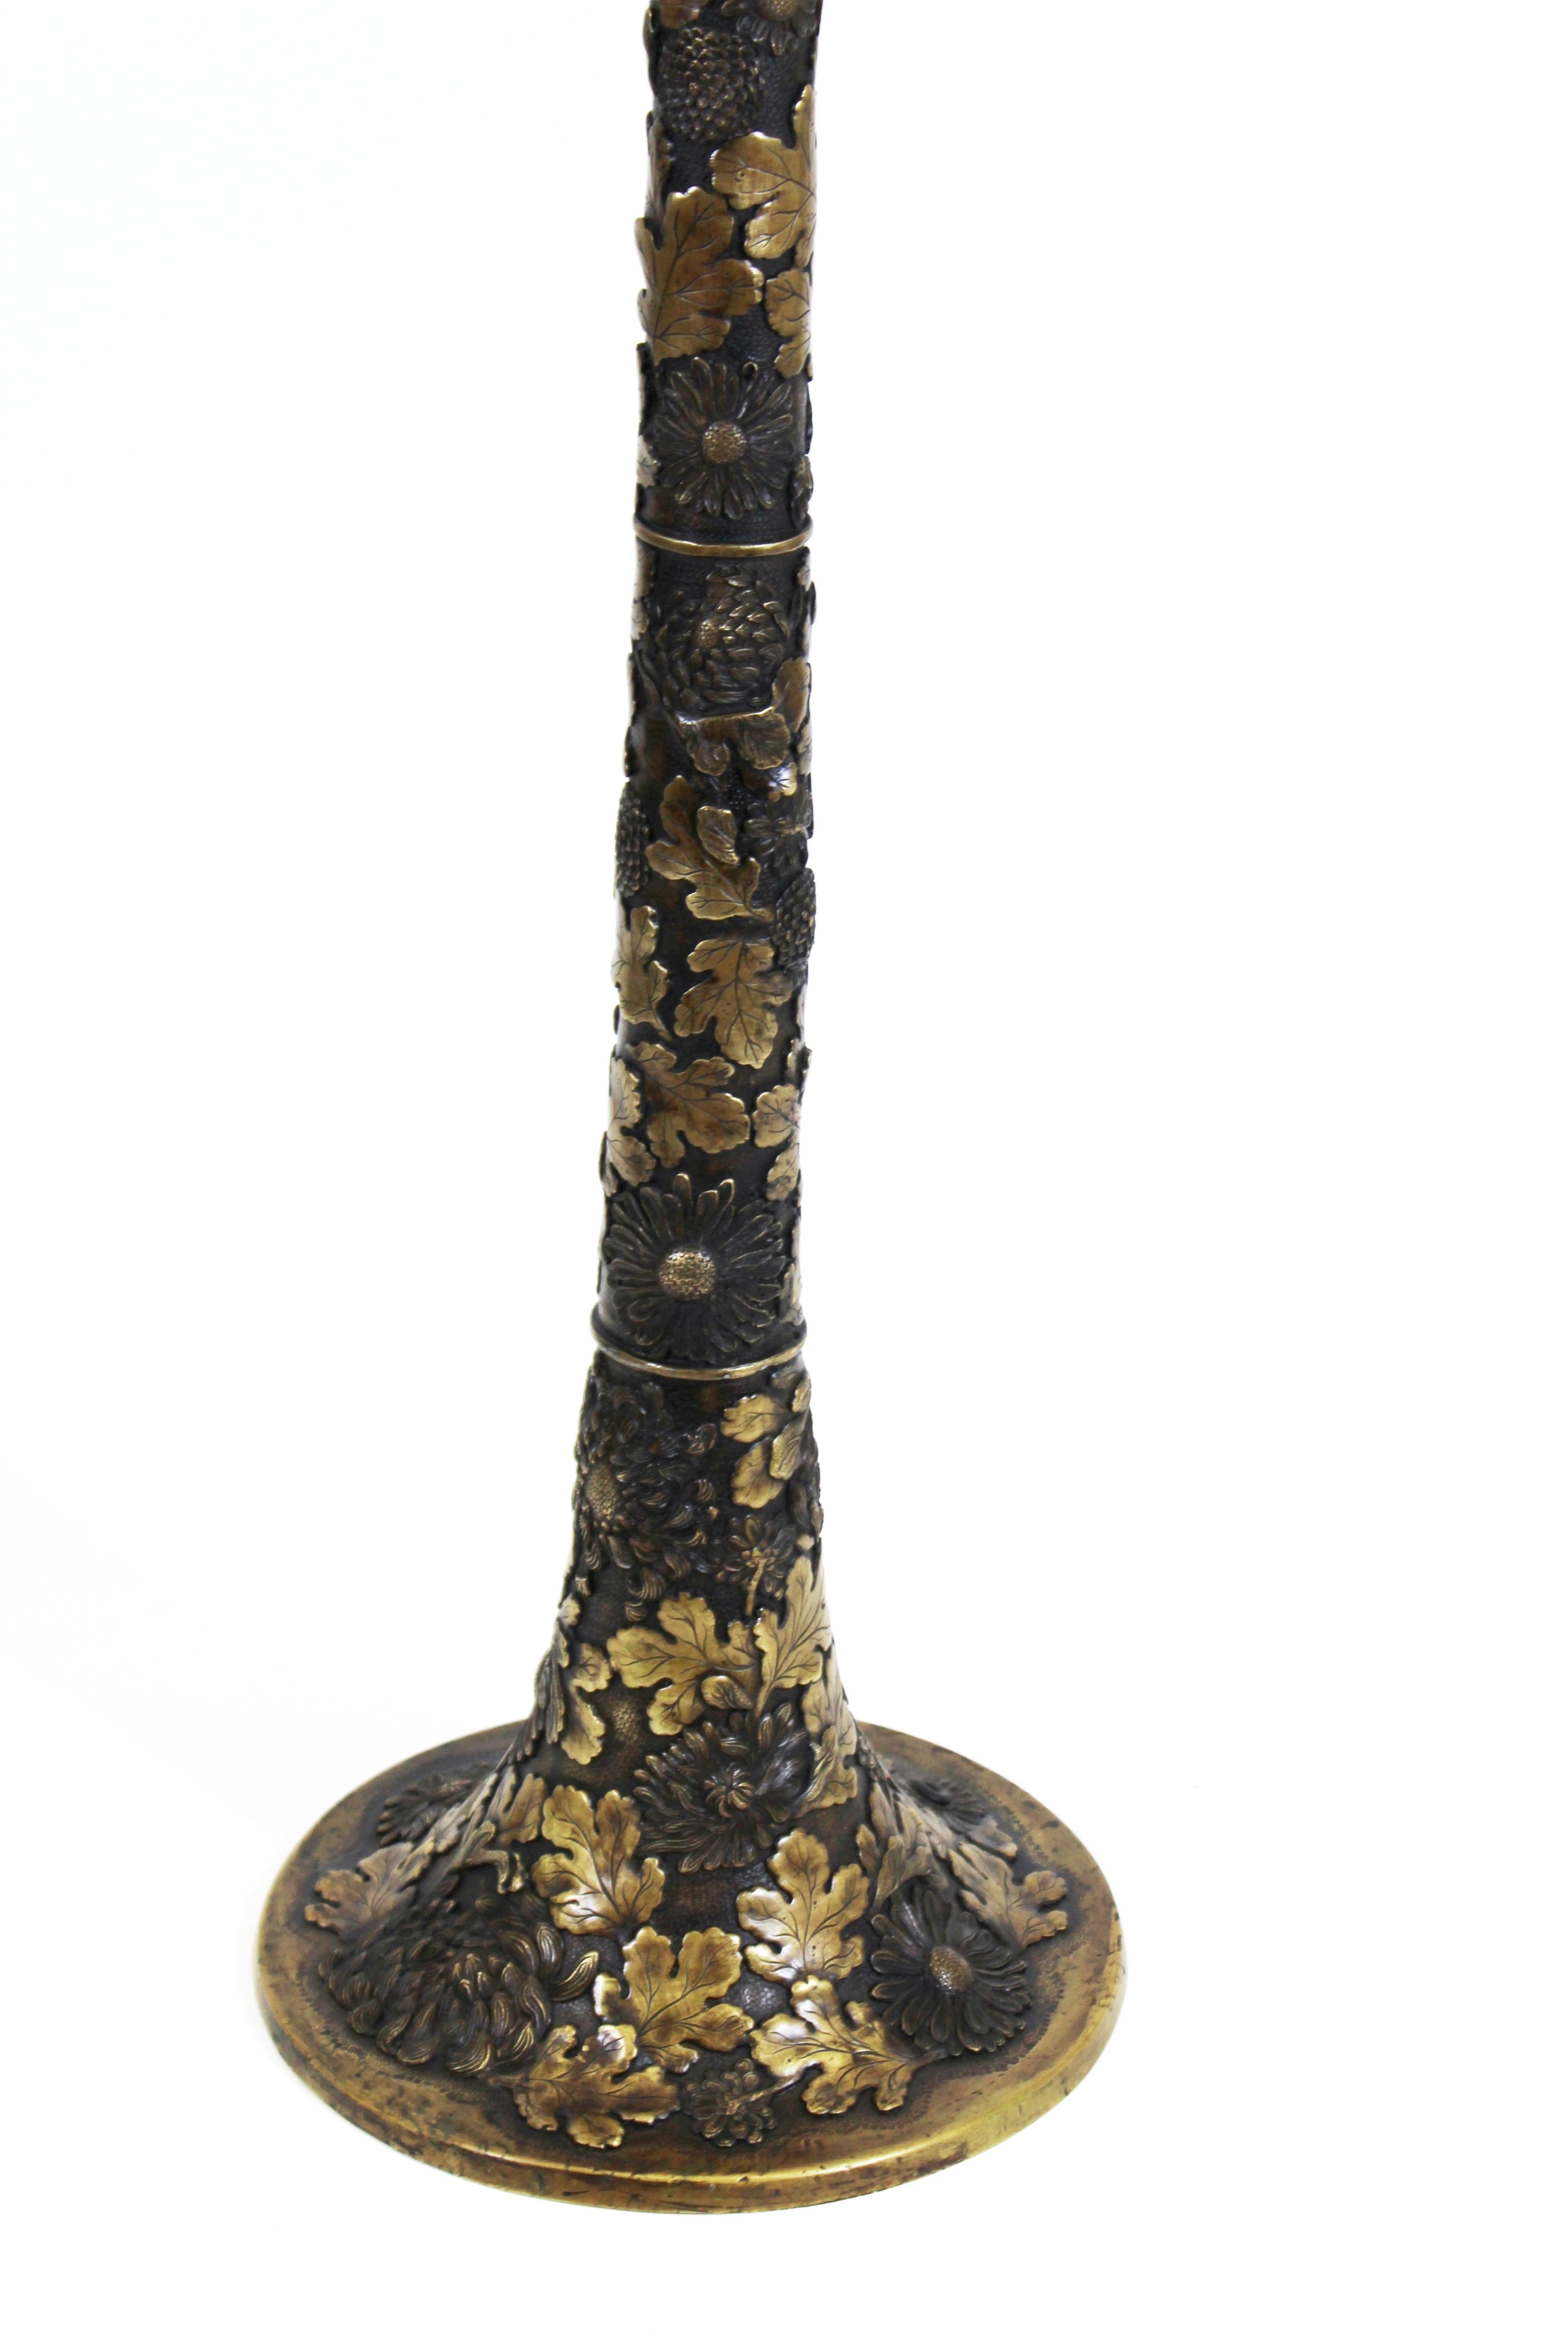 Japanese Taisho period Art Nouveau bronze table lamp with intricate floral design of chrysanthemums and oak leaves. The chrysanthemum is one of the most important symbols in Japanese culture and represents the country as well as the imperial seal of